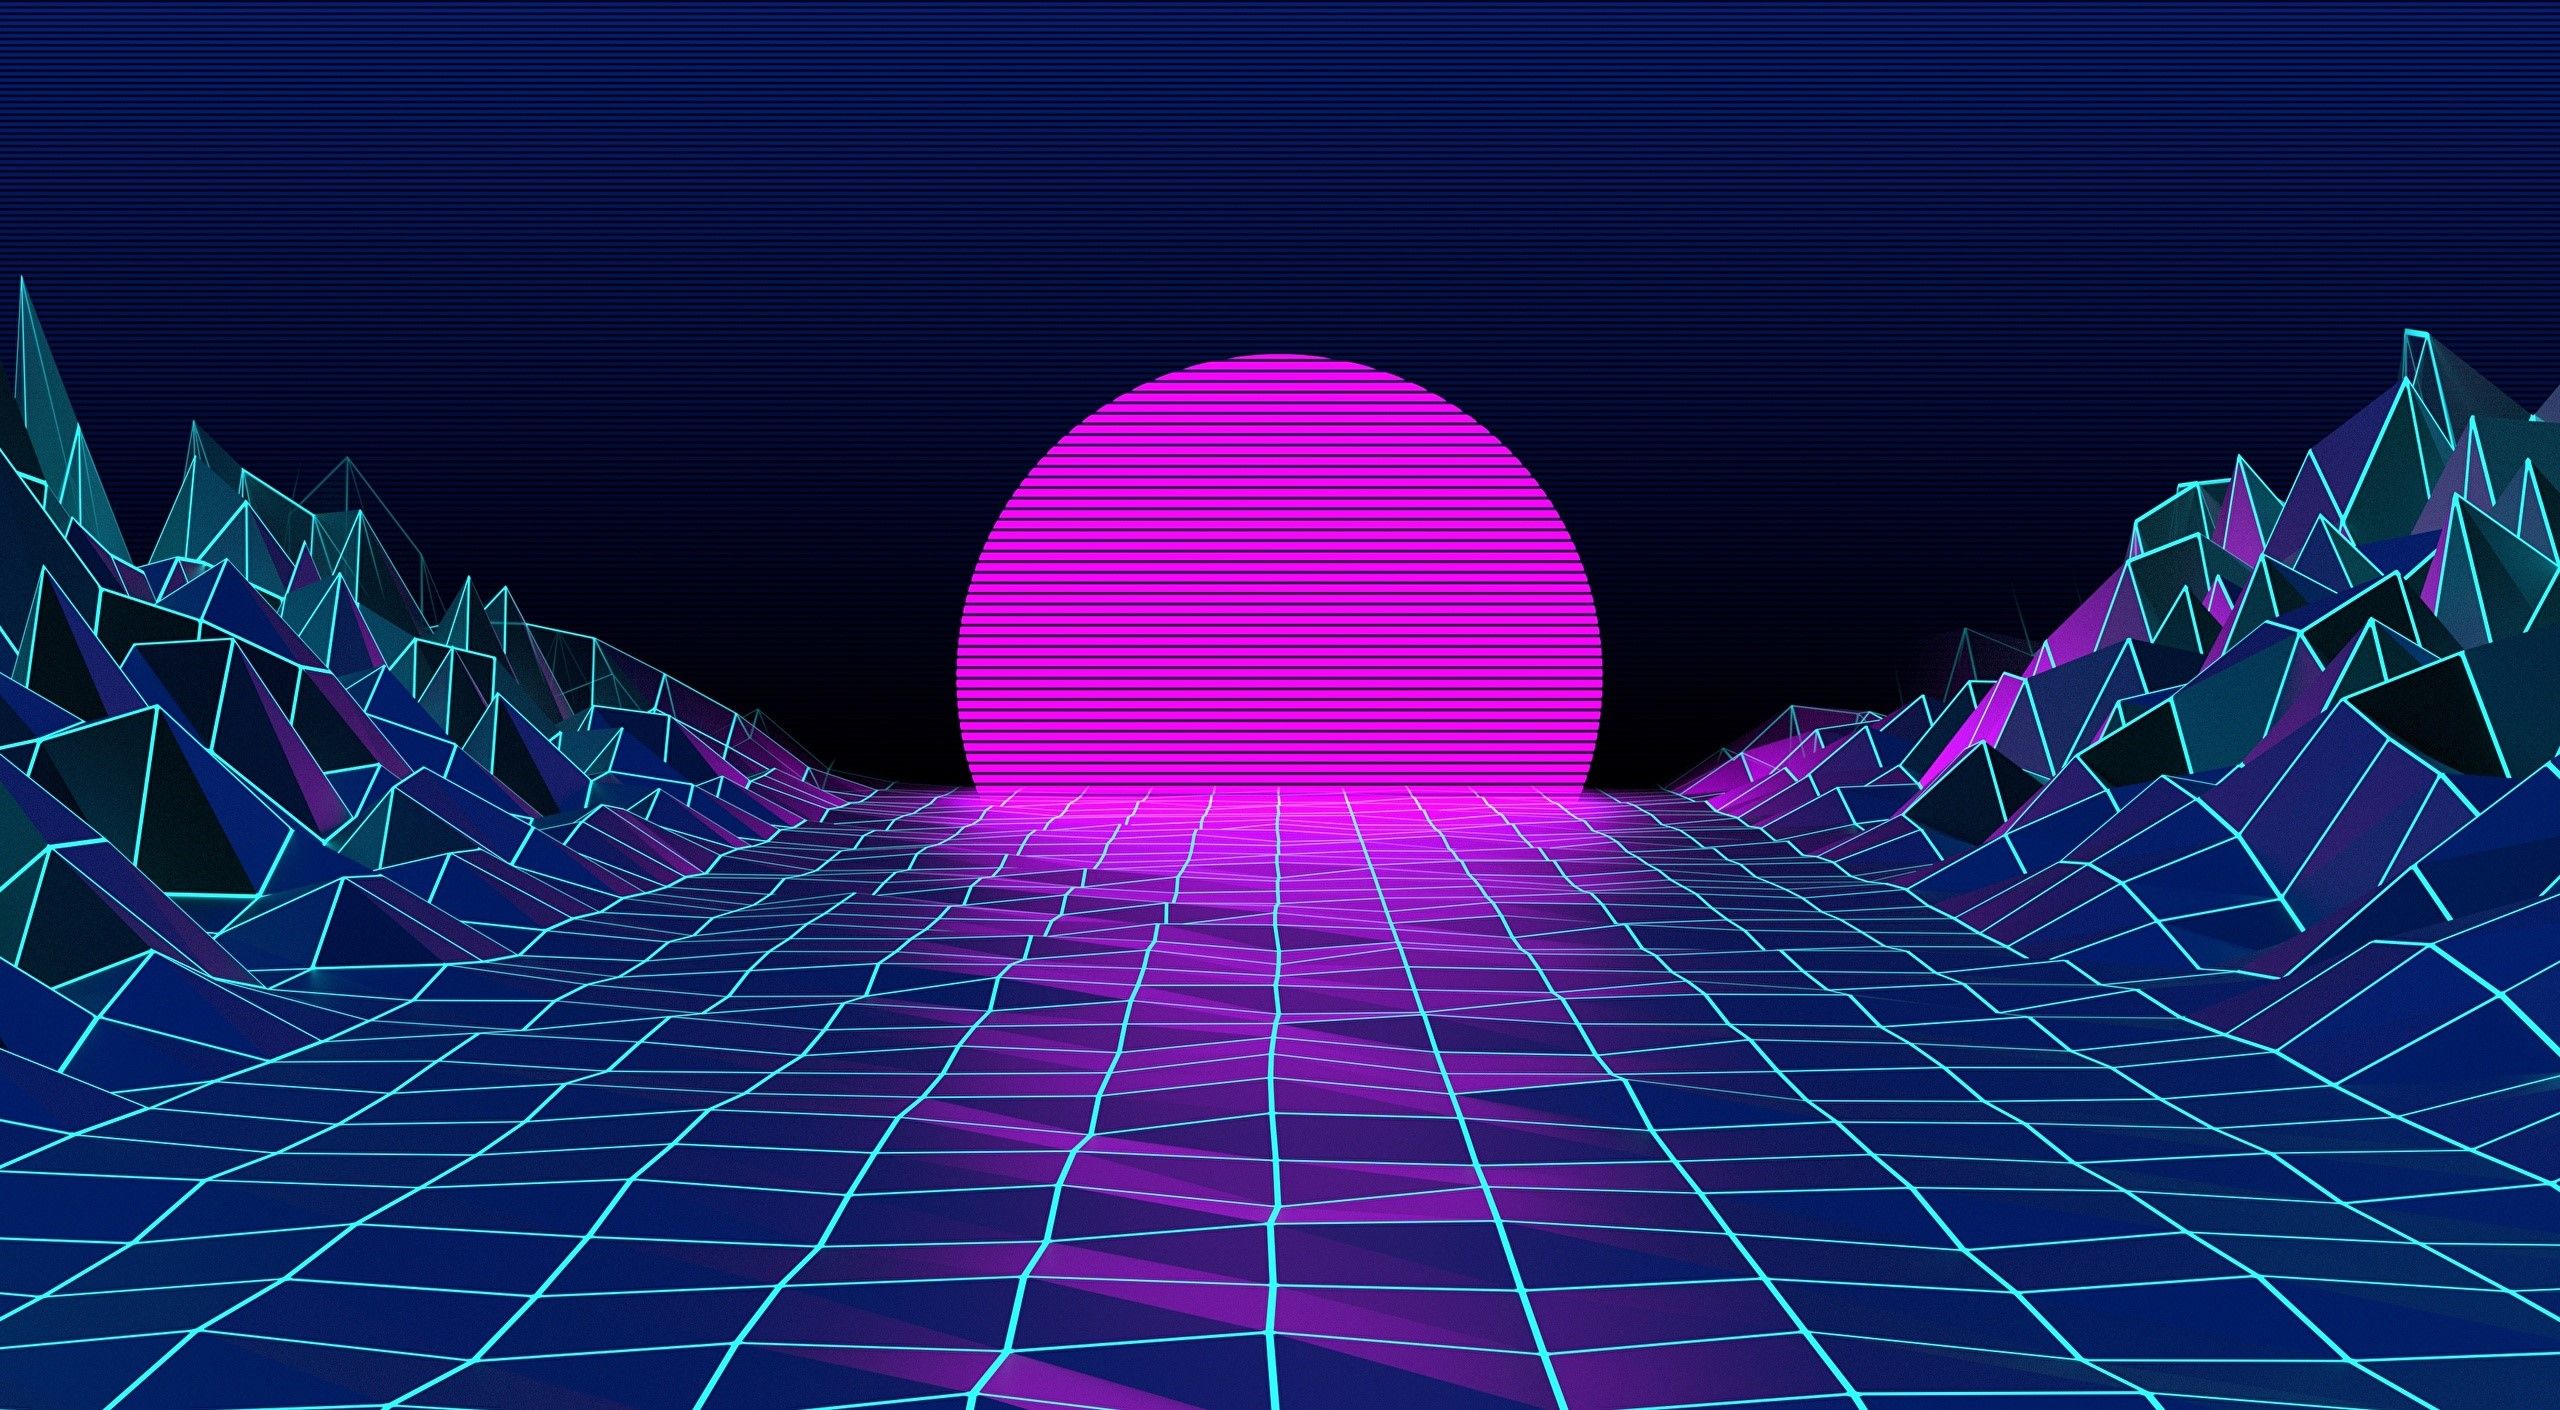 Retrowave 80s synthwave background. Digital landscape in the style of the 80s. - 3D